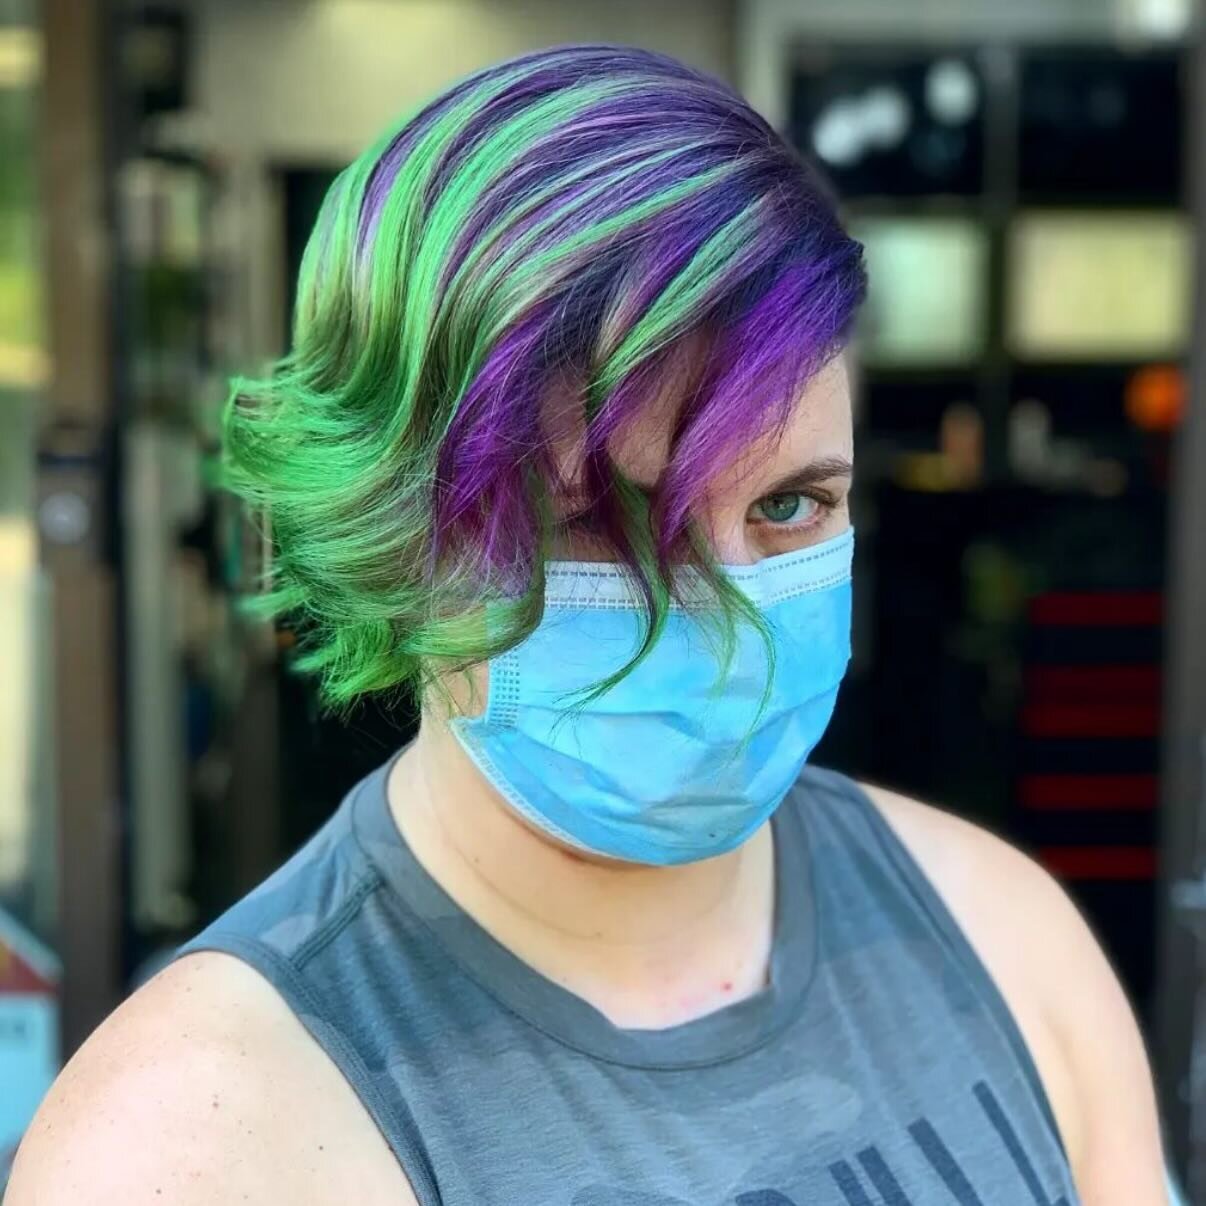 Obsessed over this color creation by Tiana!💜💚